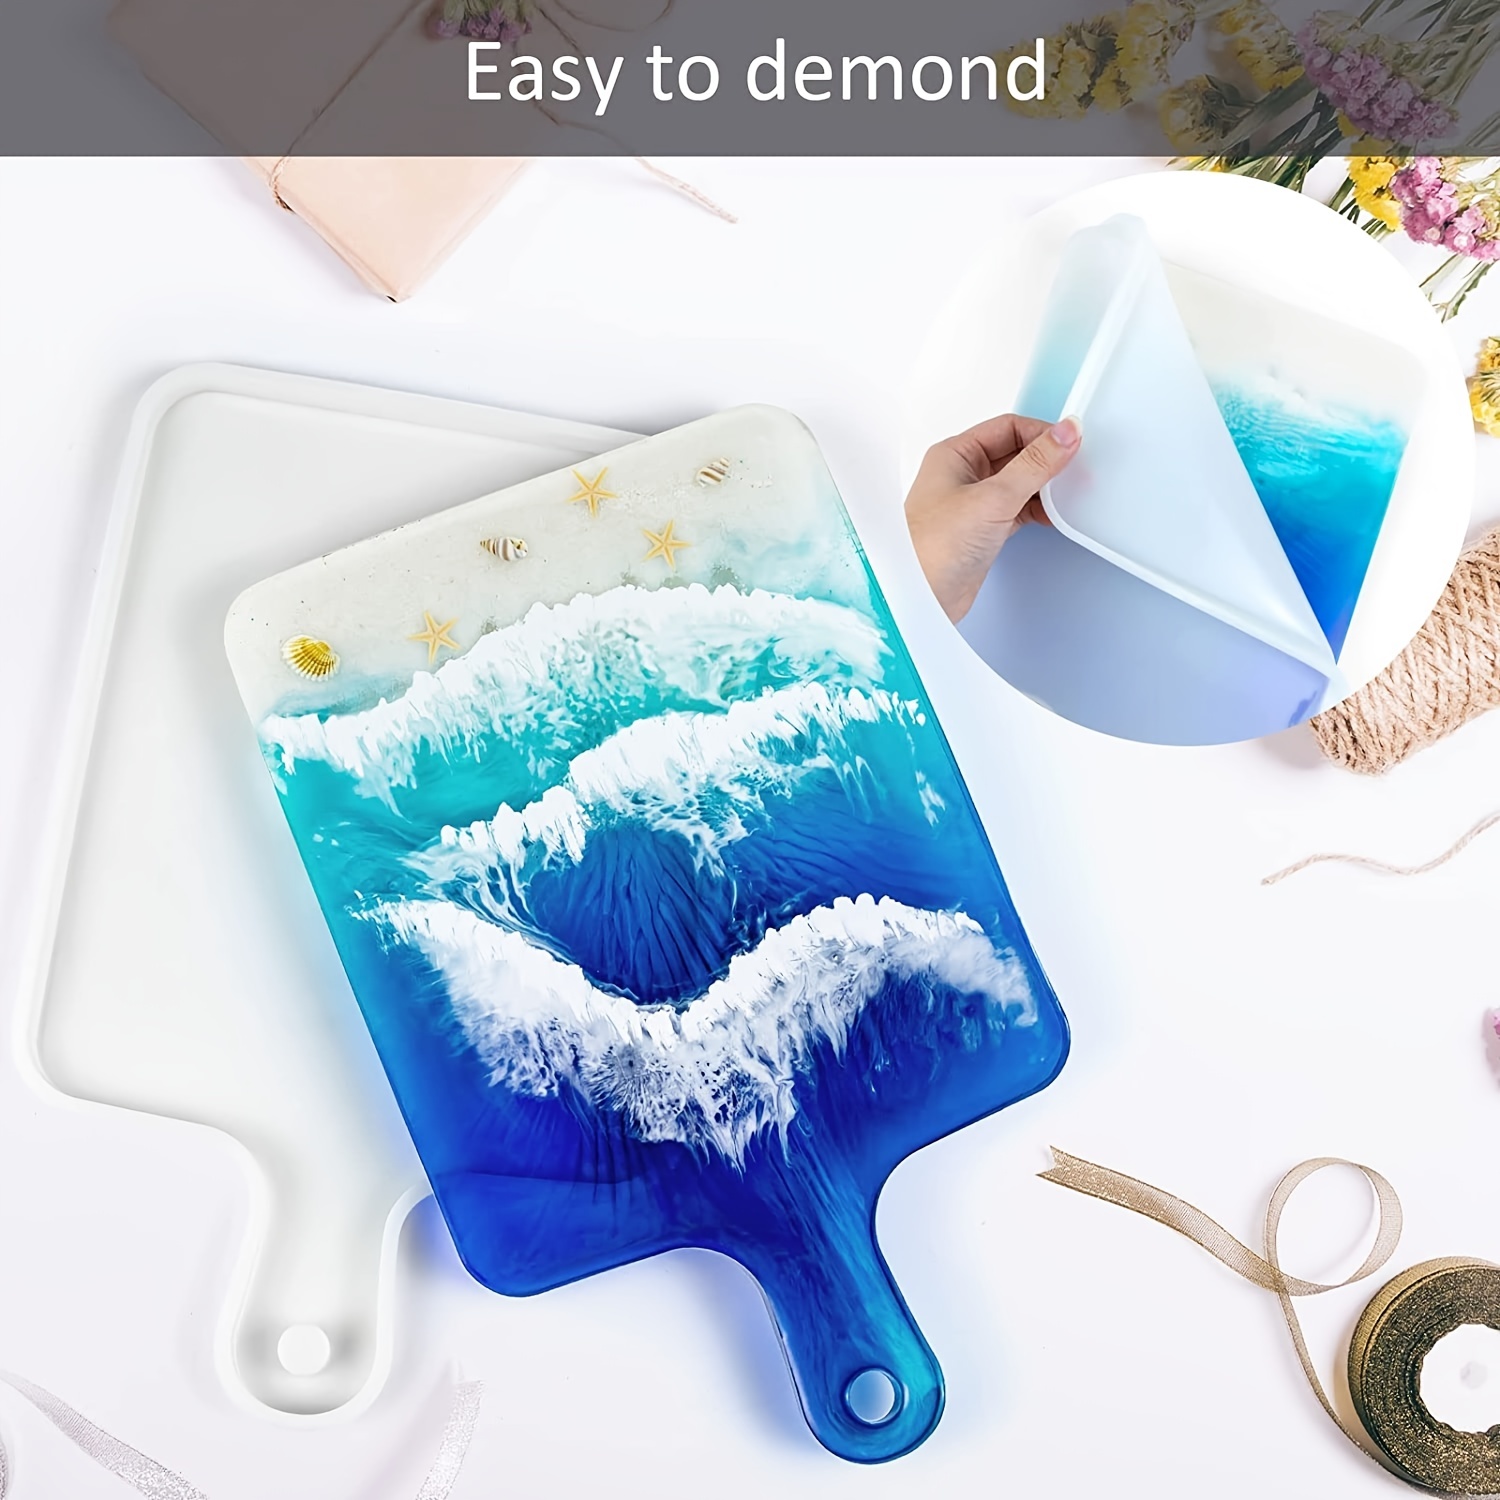 DIY Resin Tray Mold Set Silicone Rectangle And Round Shapes For Epoxy Resin  Molding Casting And Home Decoration From Giftvinco13, $4.49